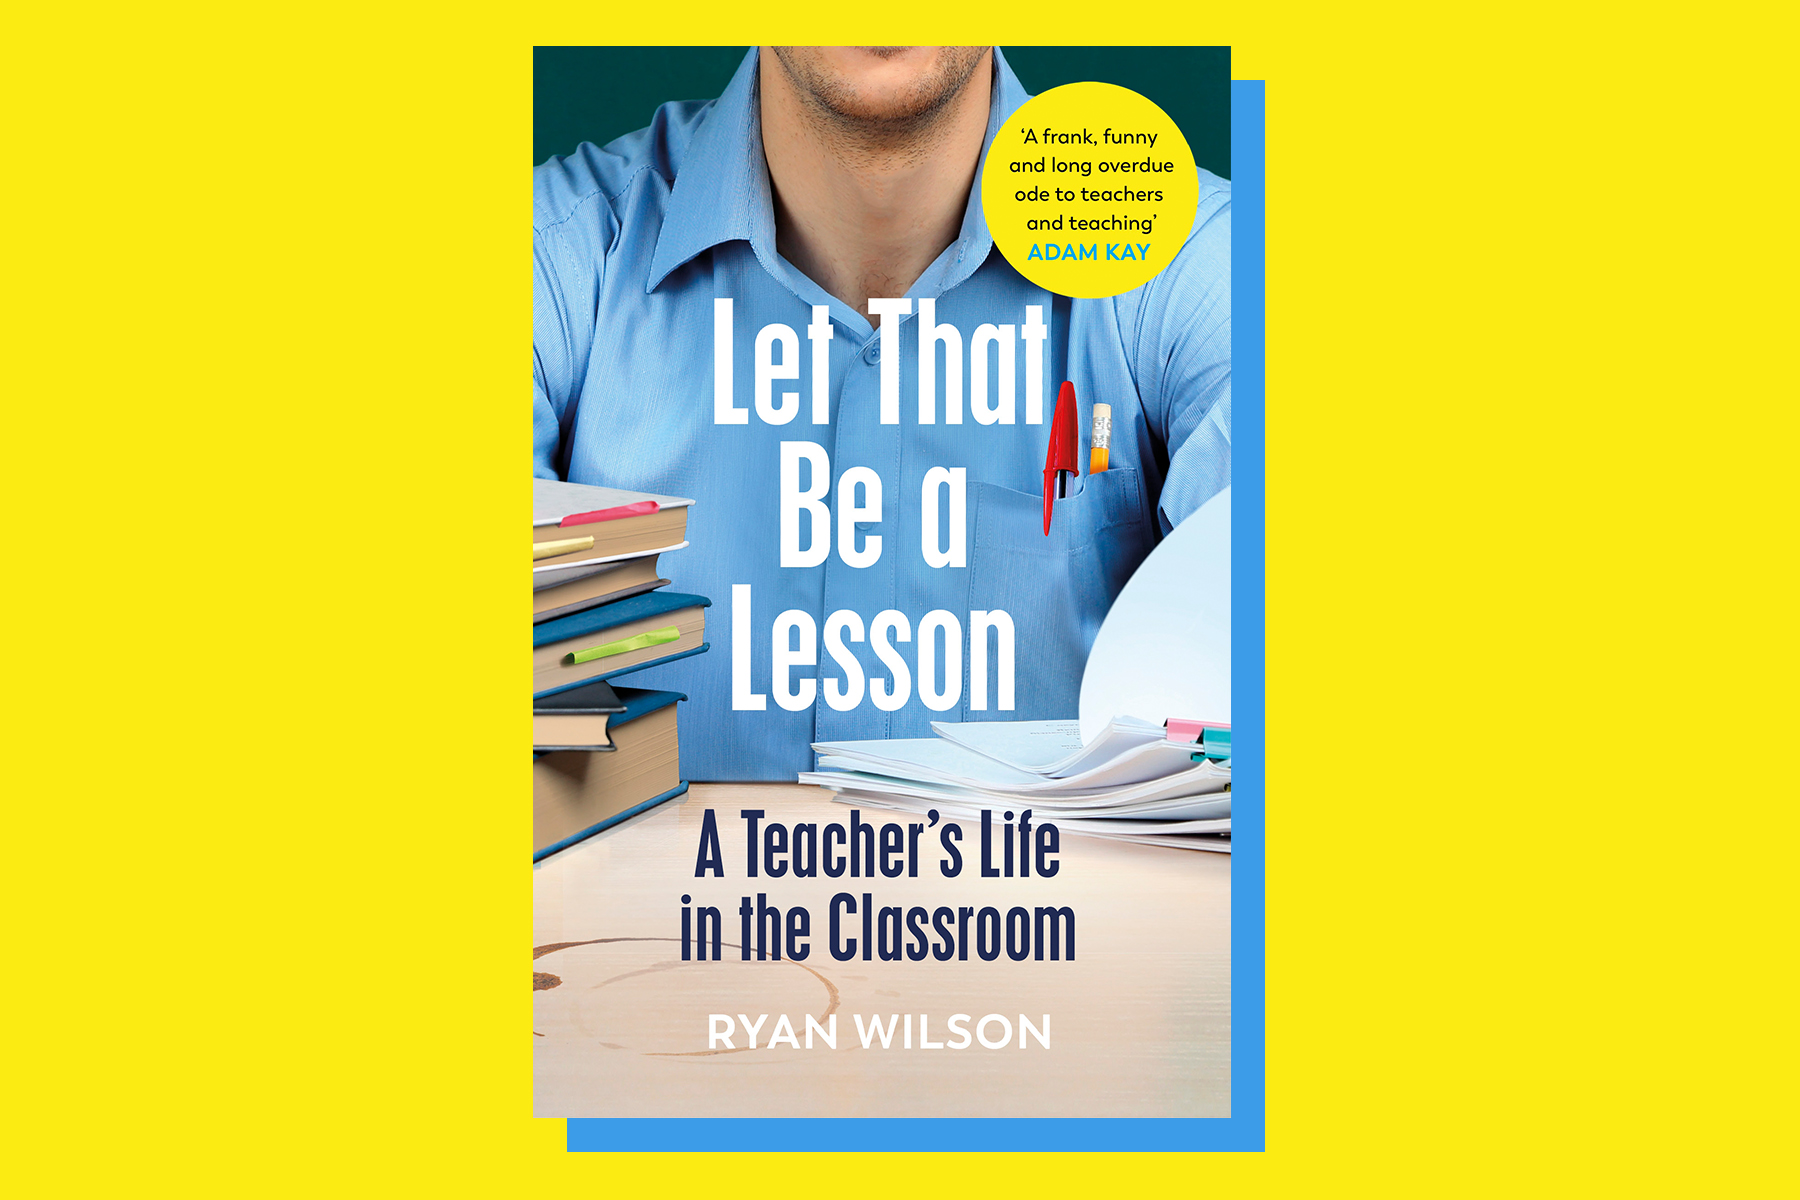 Book, Let That be a Lesson by Ryan Wilson, against a bright yellow background